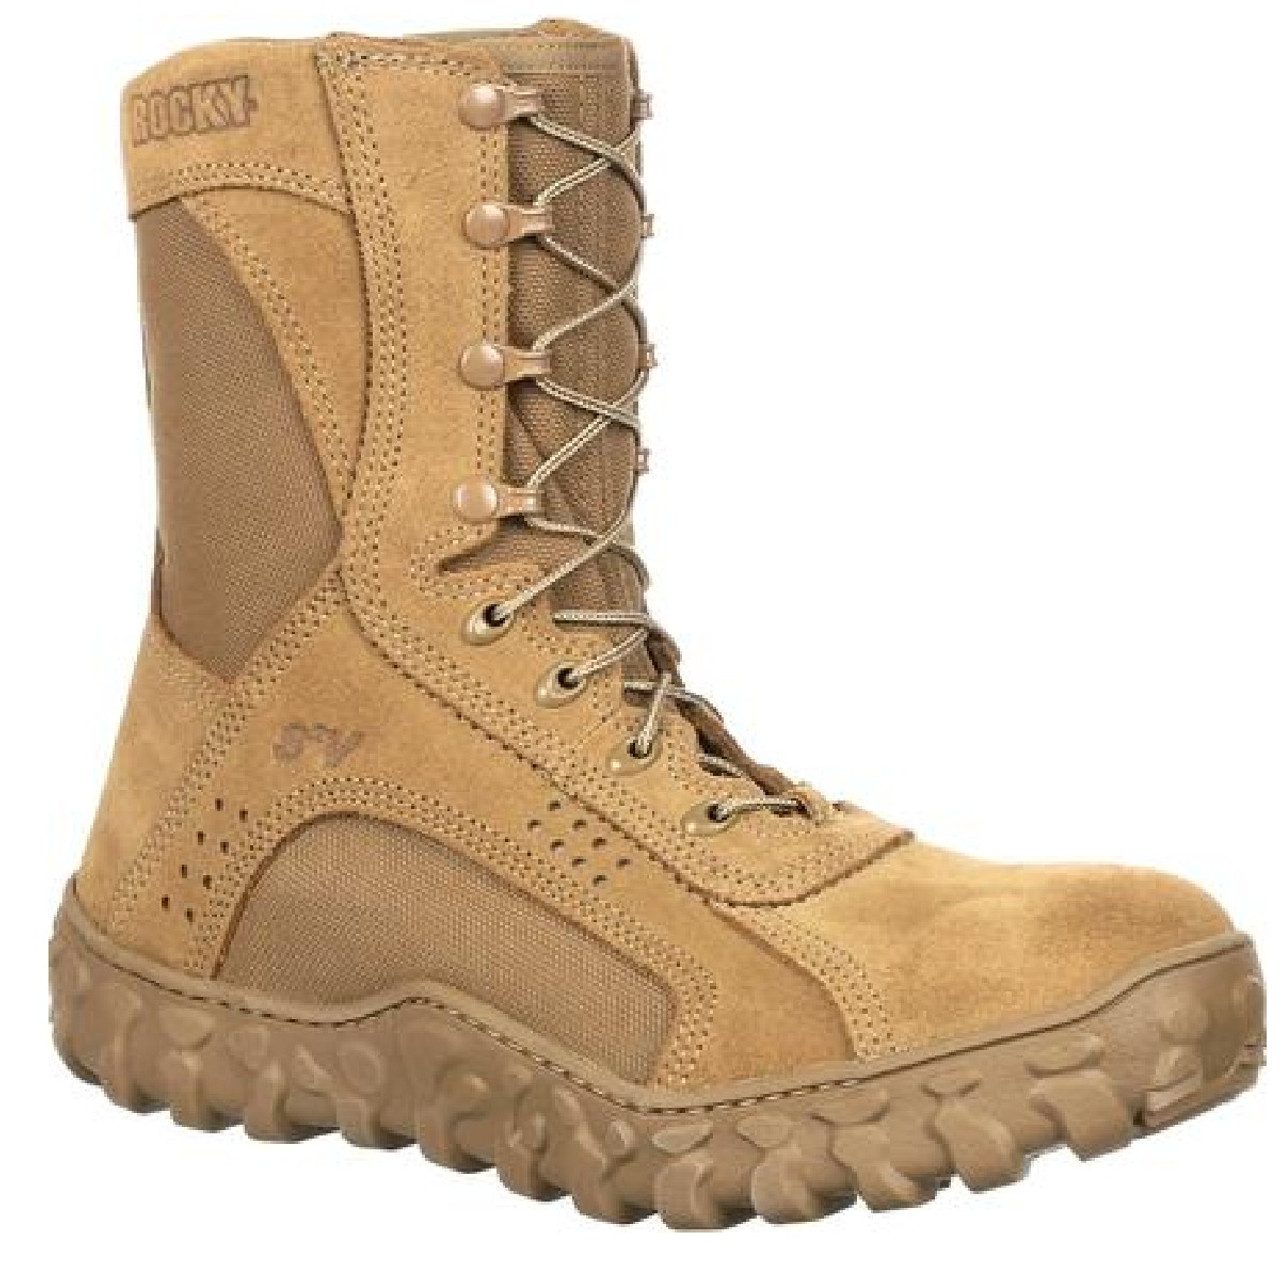 Rocky RKC089 S2V Composite Toe Tactical Military Boot Light Brown